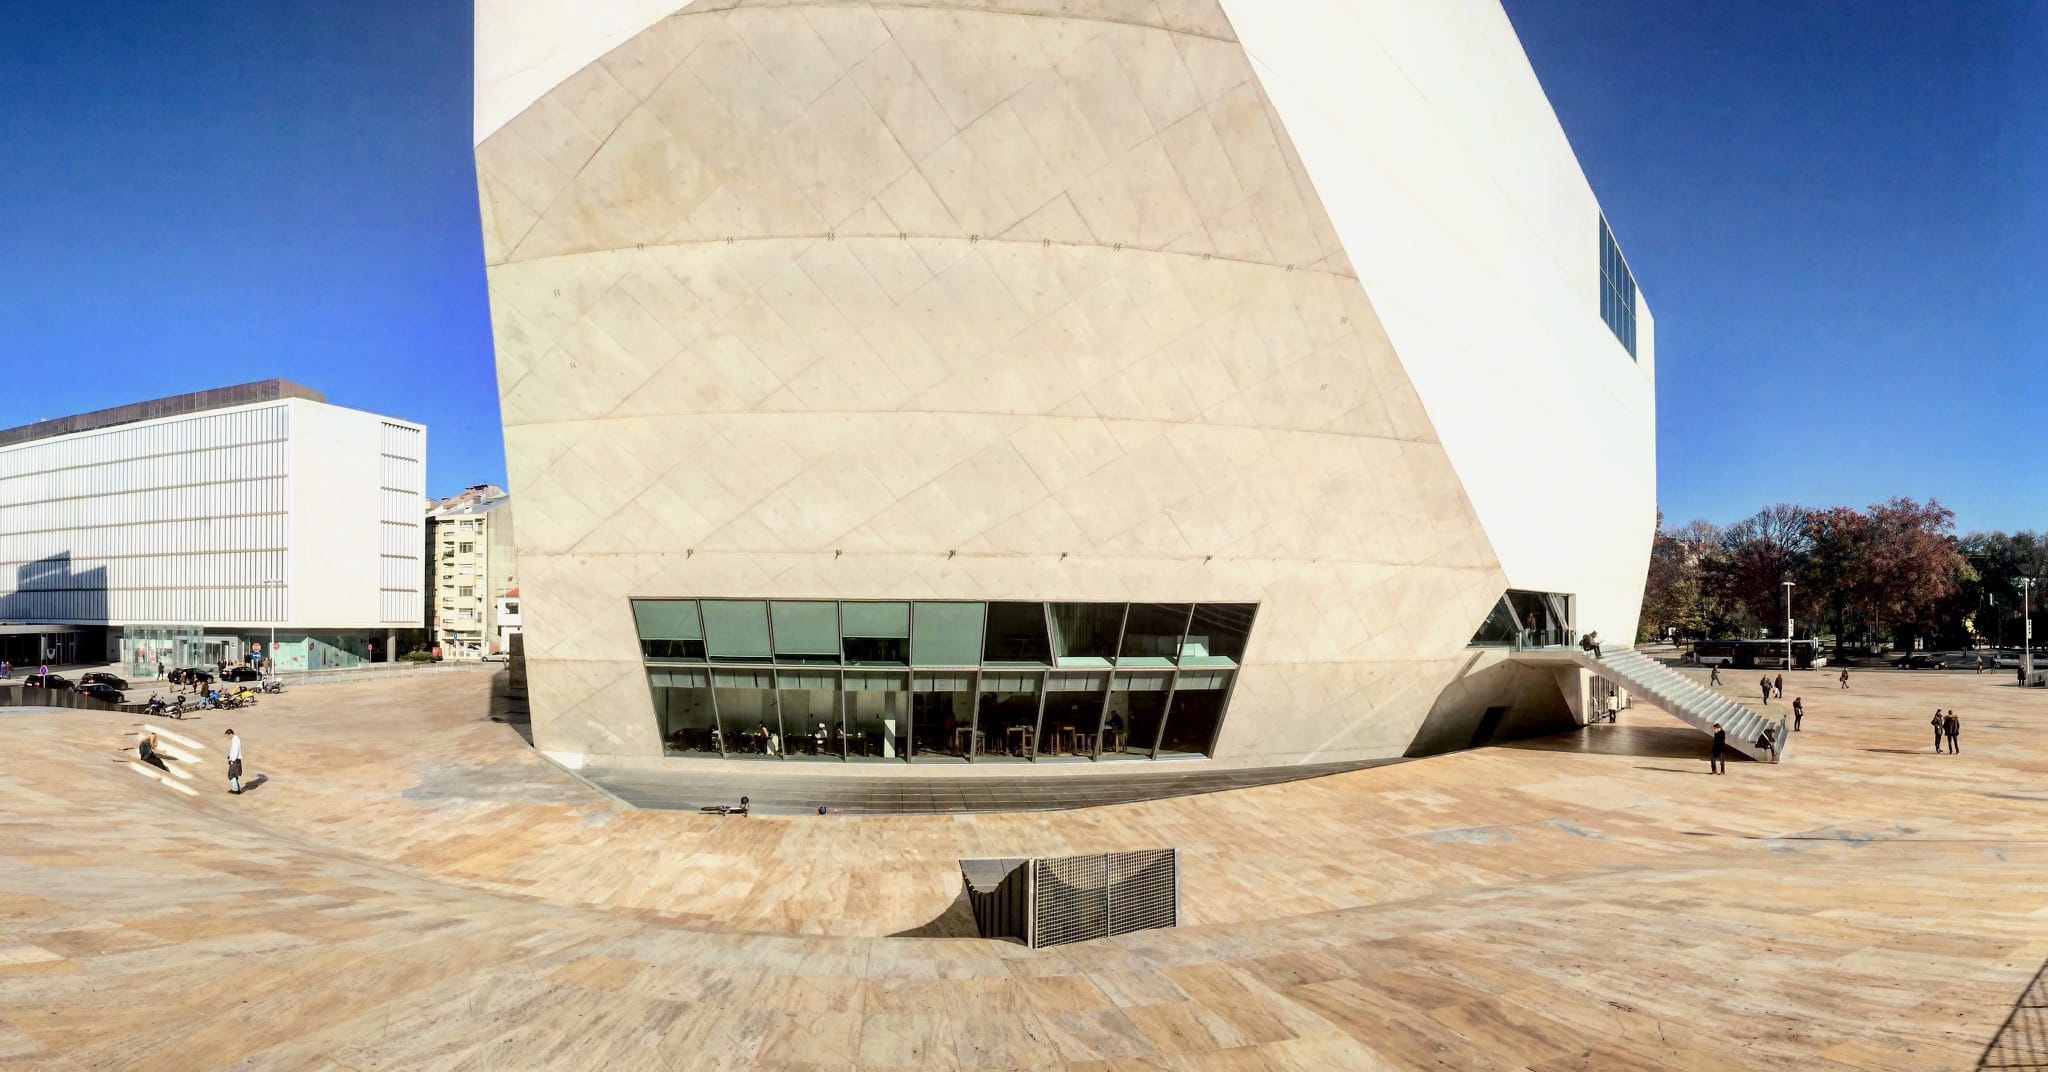 a large geometrical building sits at the center of a bowl-shaped plaza